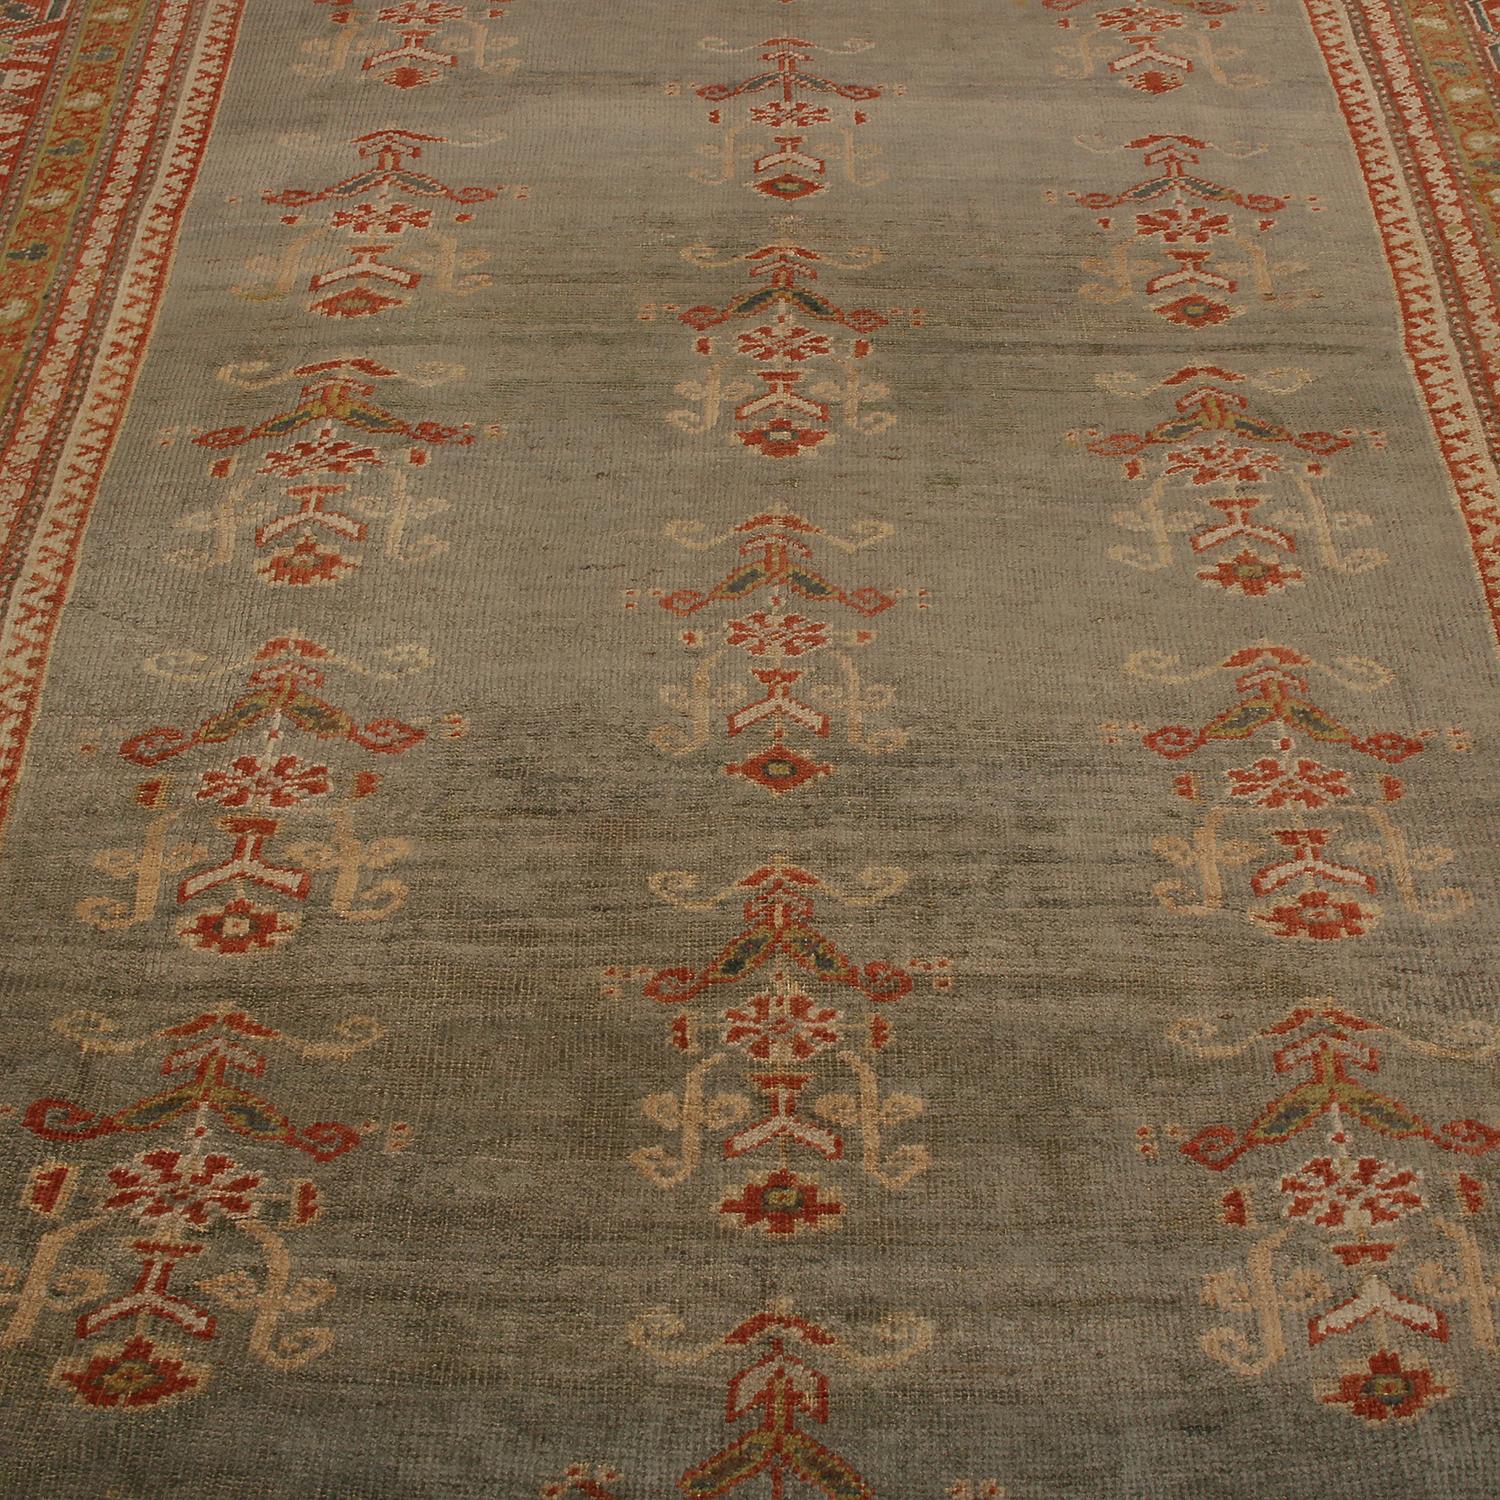 Hand-Knotted Antique Sultanabad Blue and Burgundy Wool Persian Rug with Gold-Brown Highlights